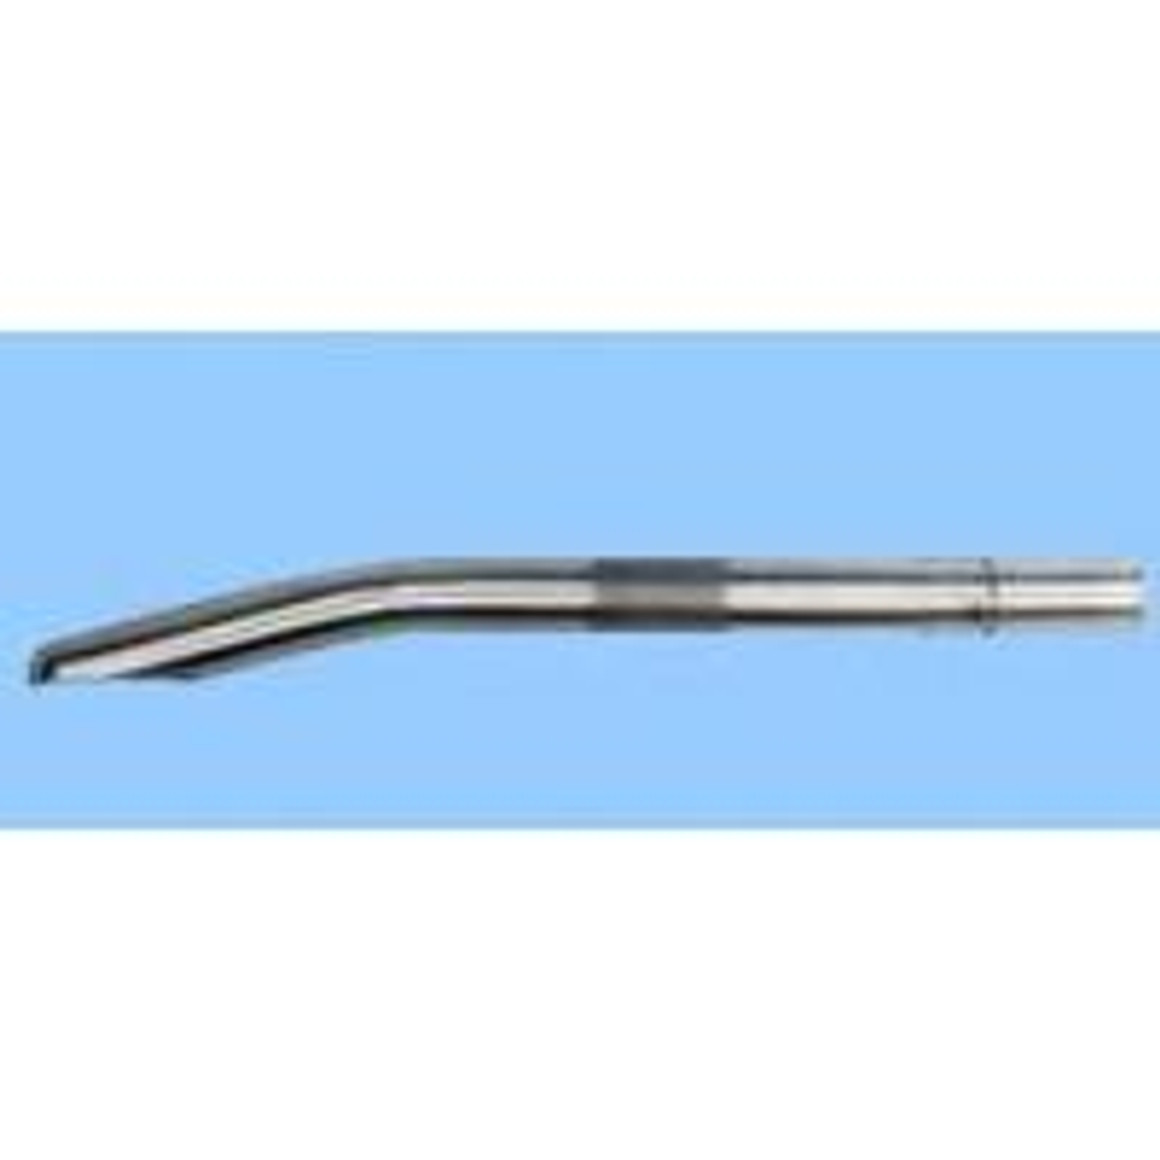 Berkeley Stainless Steel Clippers Curve